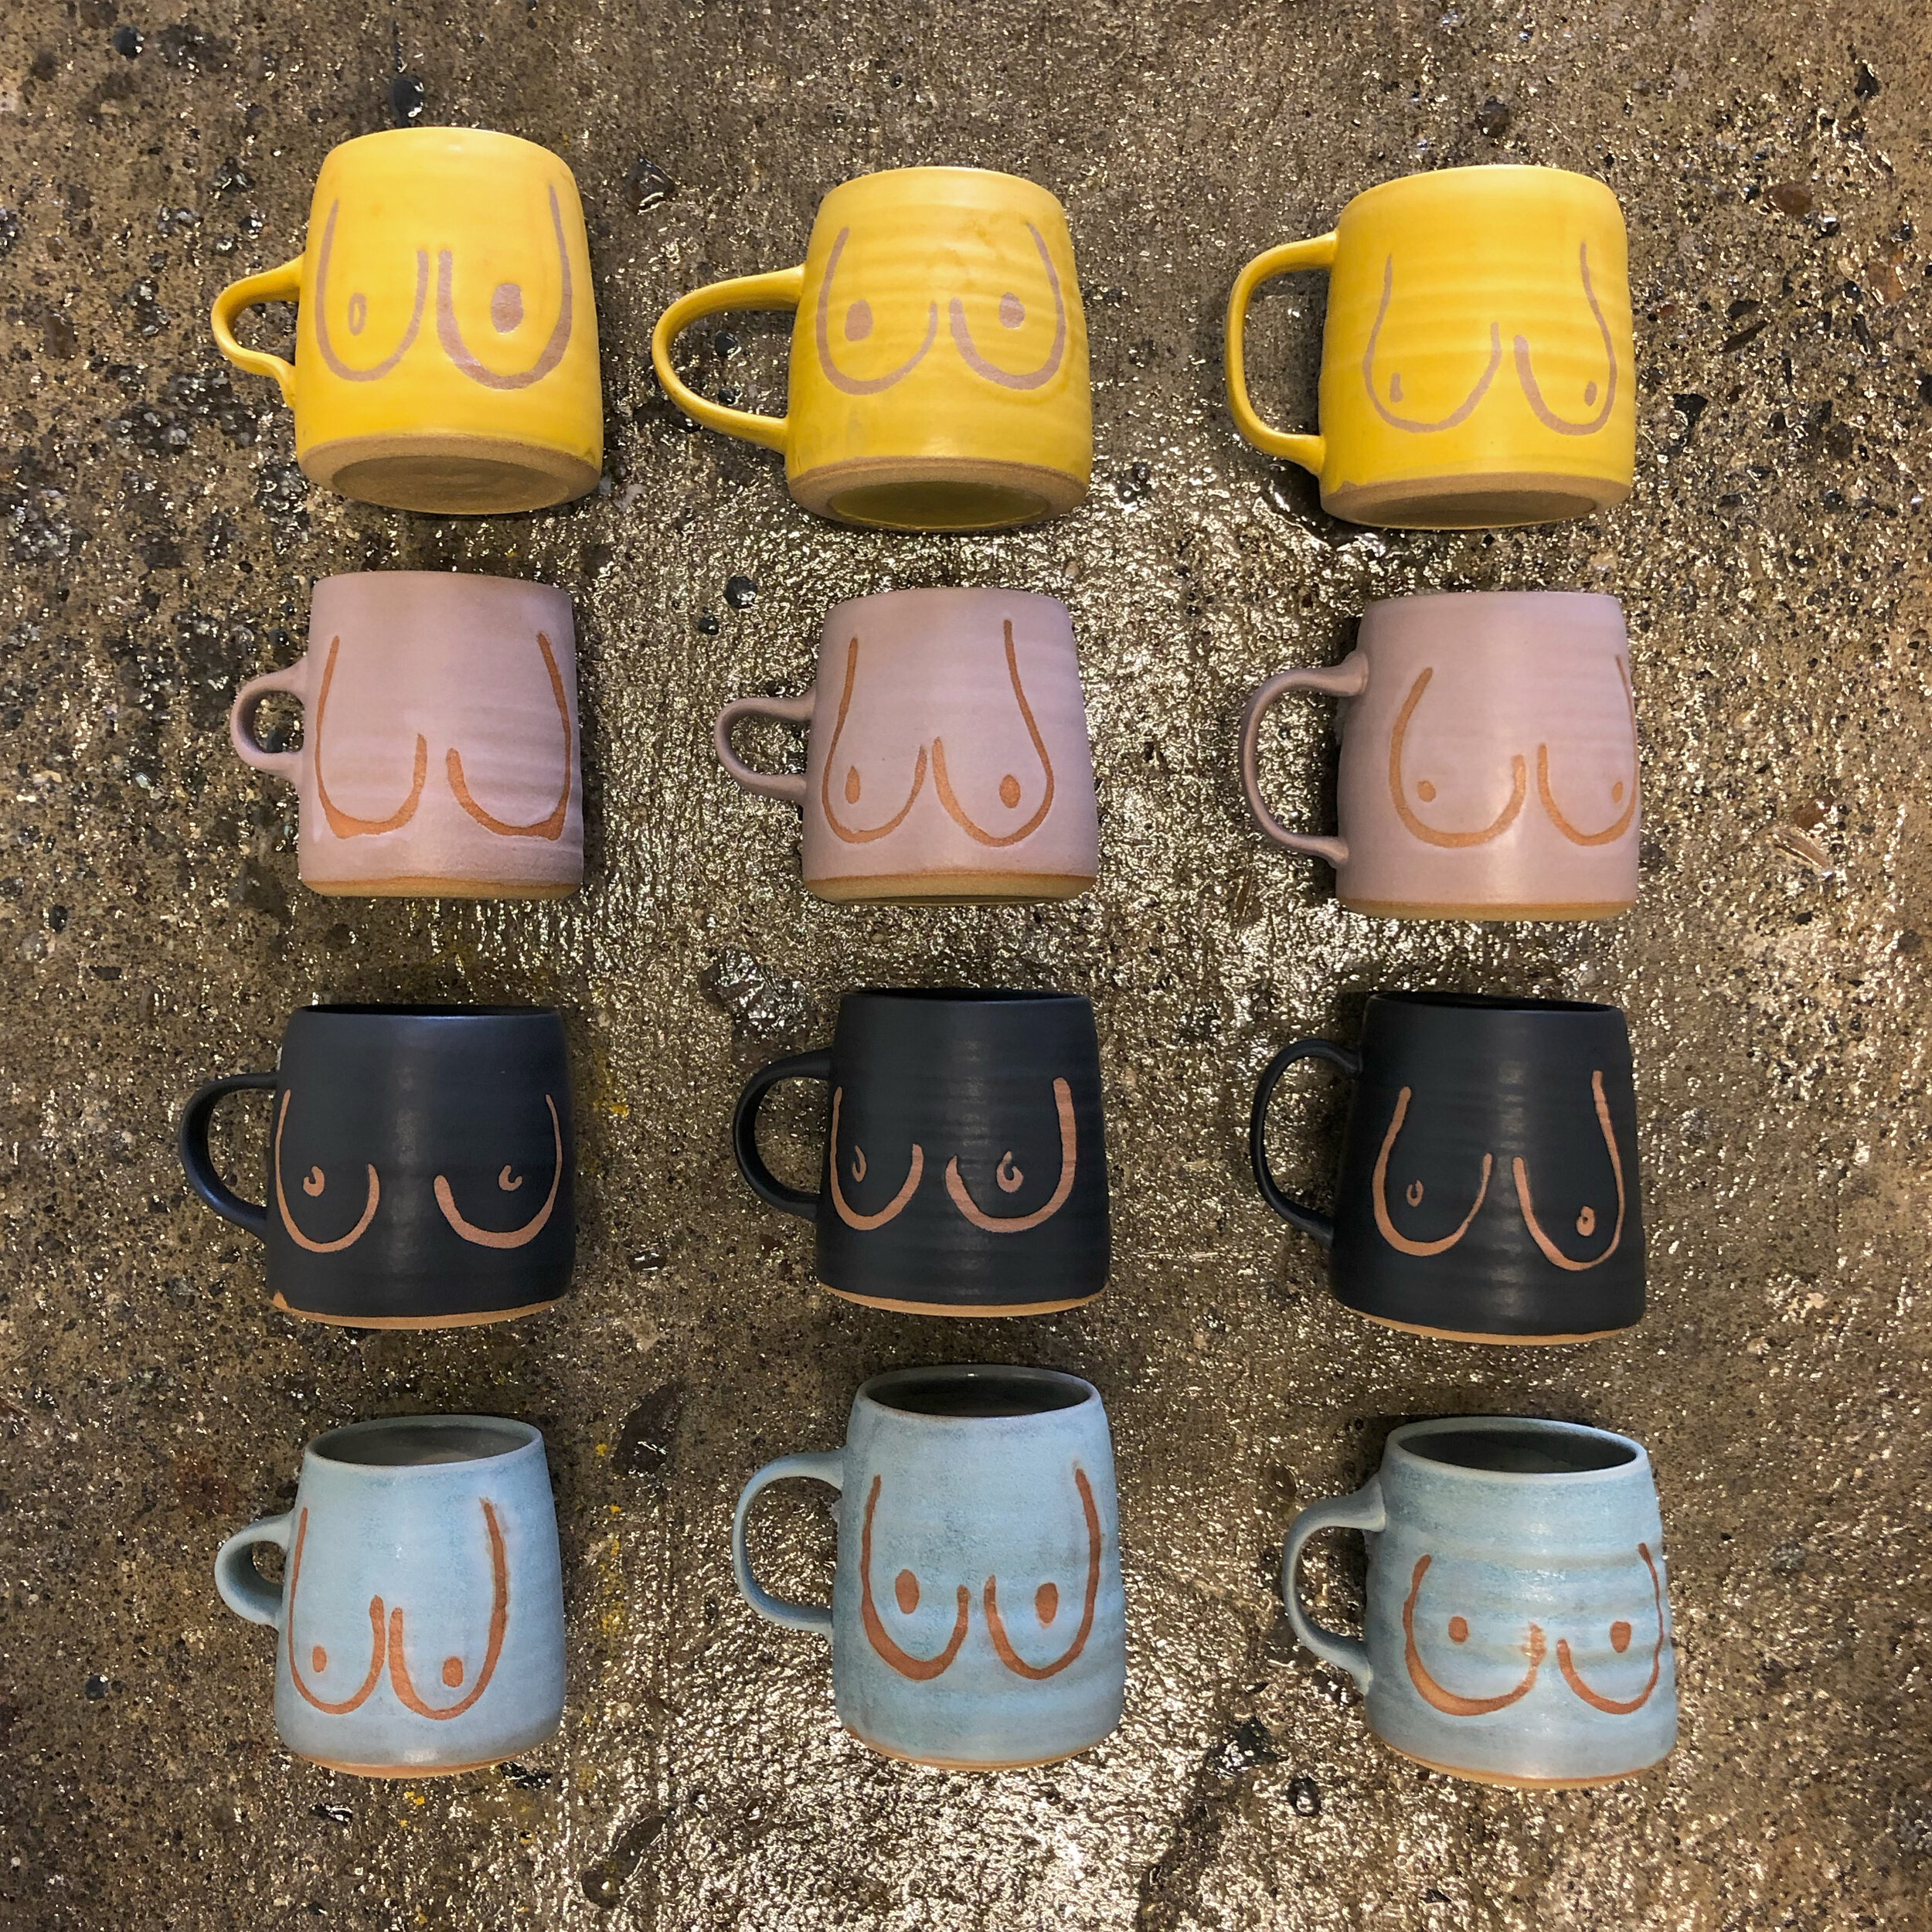 MADE TO ORDER Speckled Boob Mugs